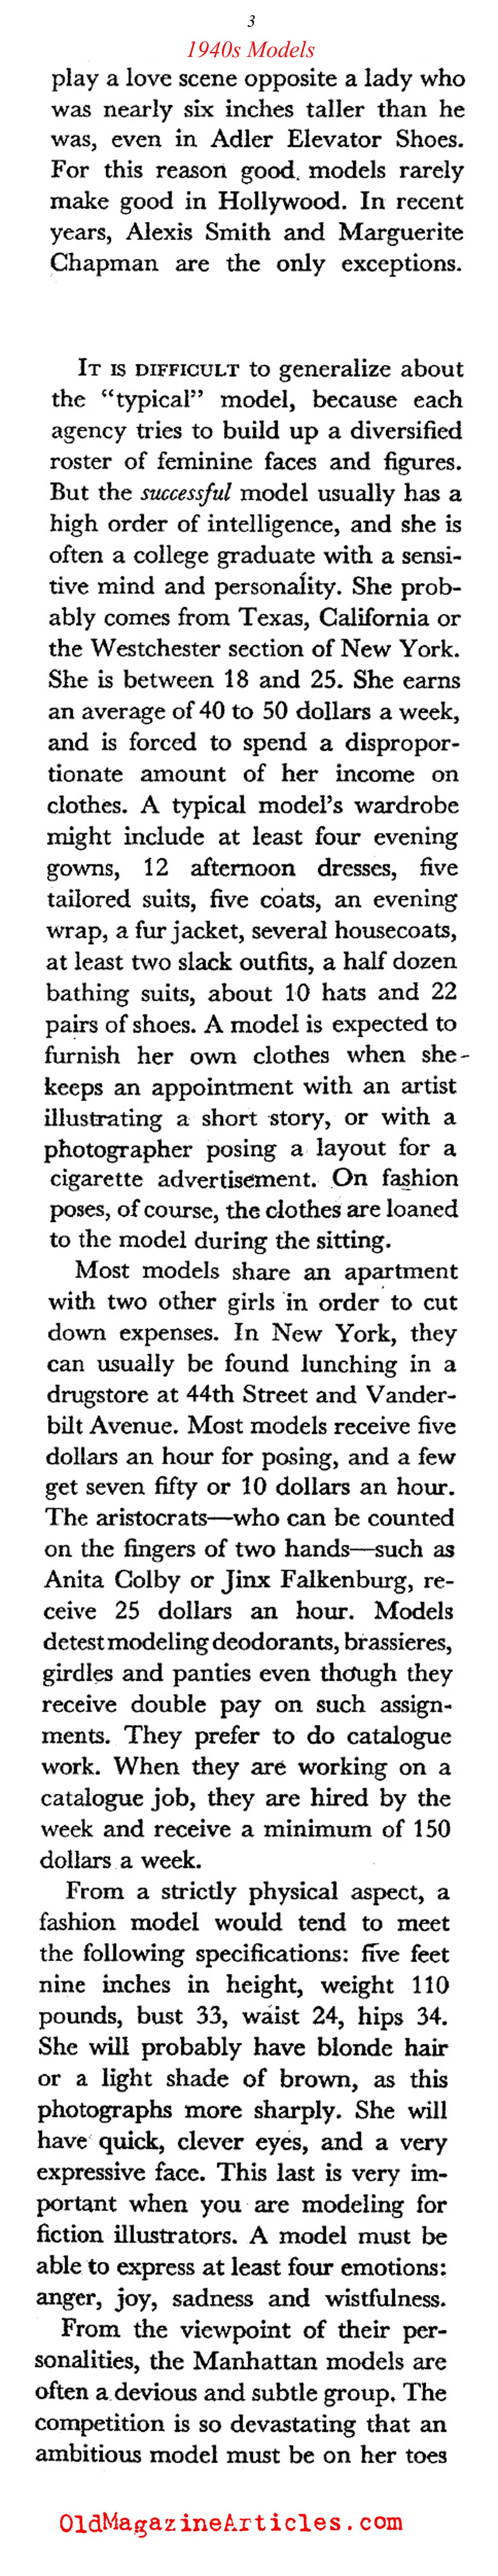 Fashion Modeling in the 1940s (Coronet Magazine, 1944)